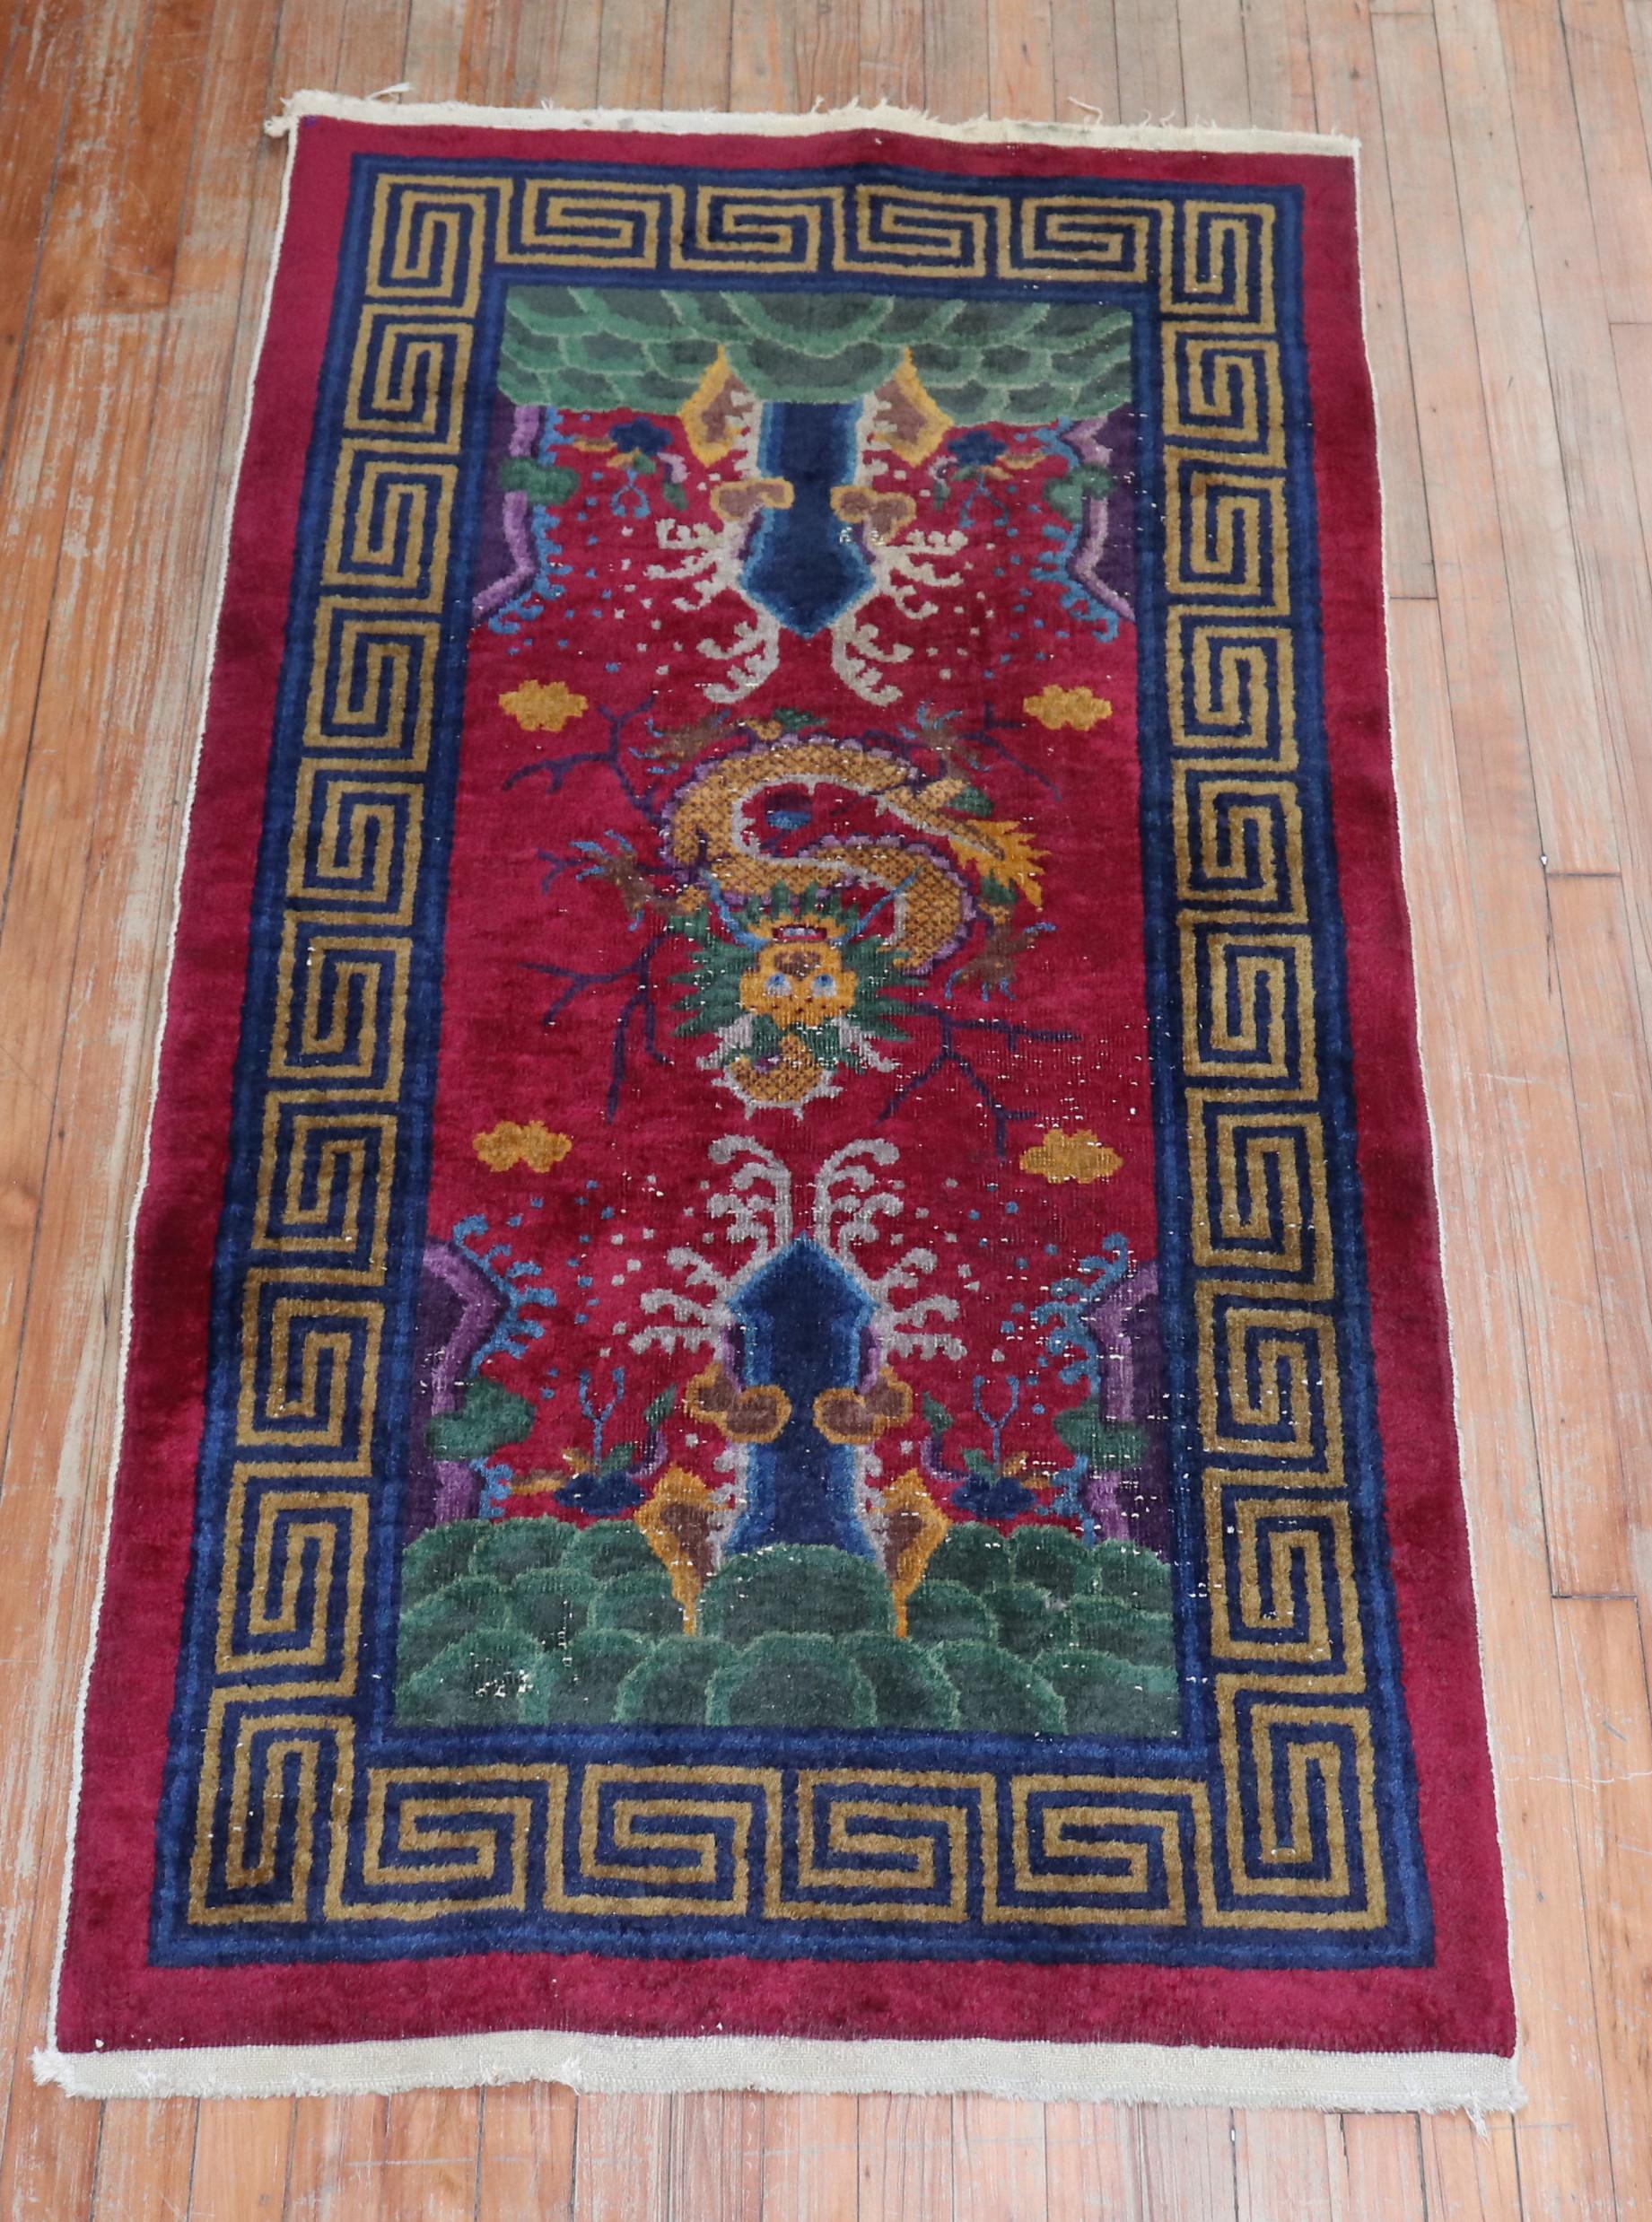 A mid-20th century Chinese rug in burgundy and navy blue with a dragon motif medallion.

Size: 3' x 6'.

 